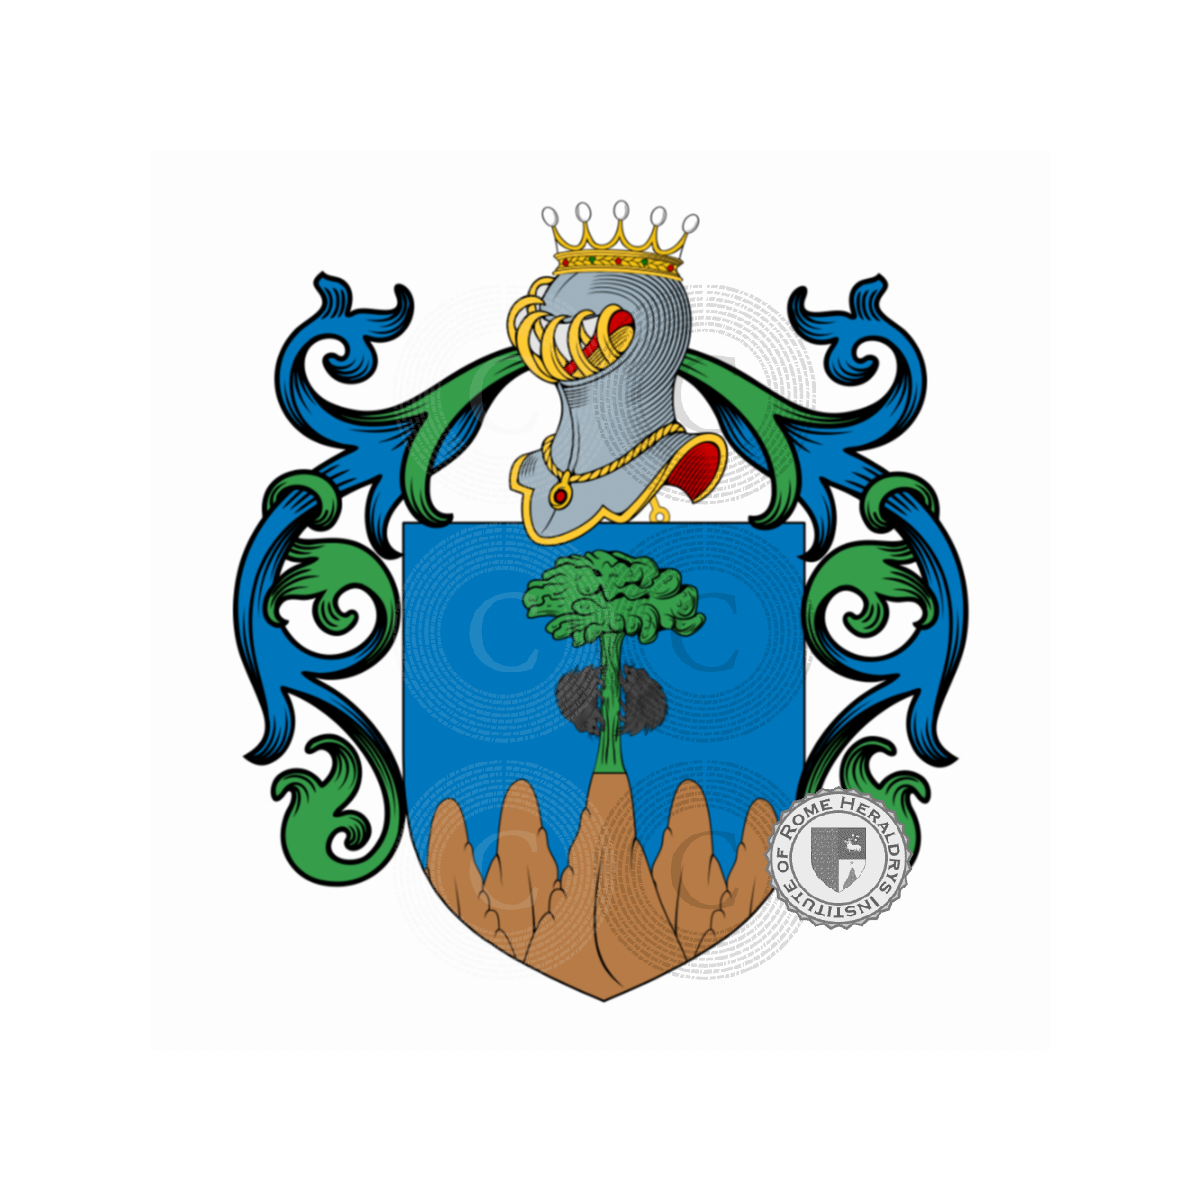 Coat of arms of familyRizzi, Ricci